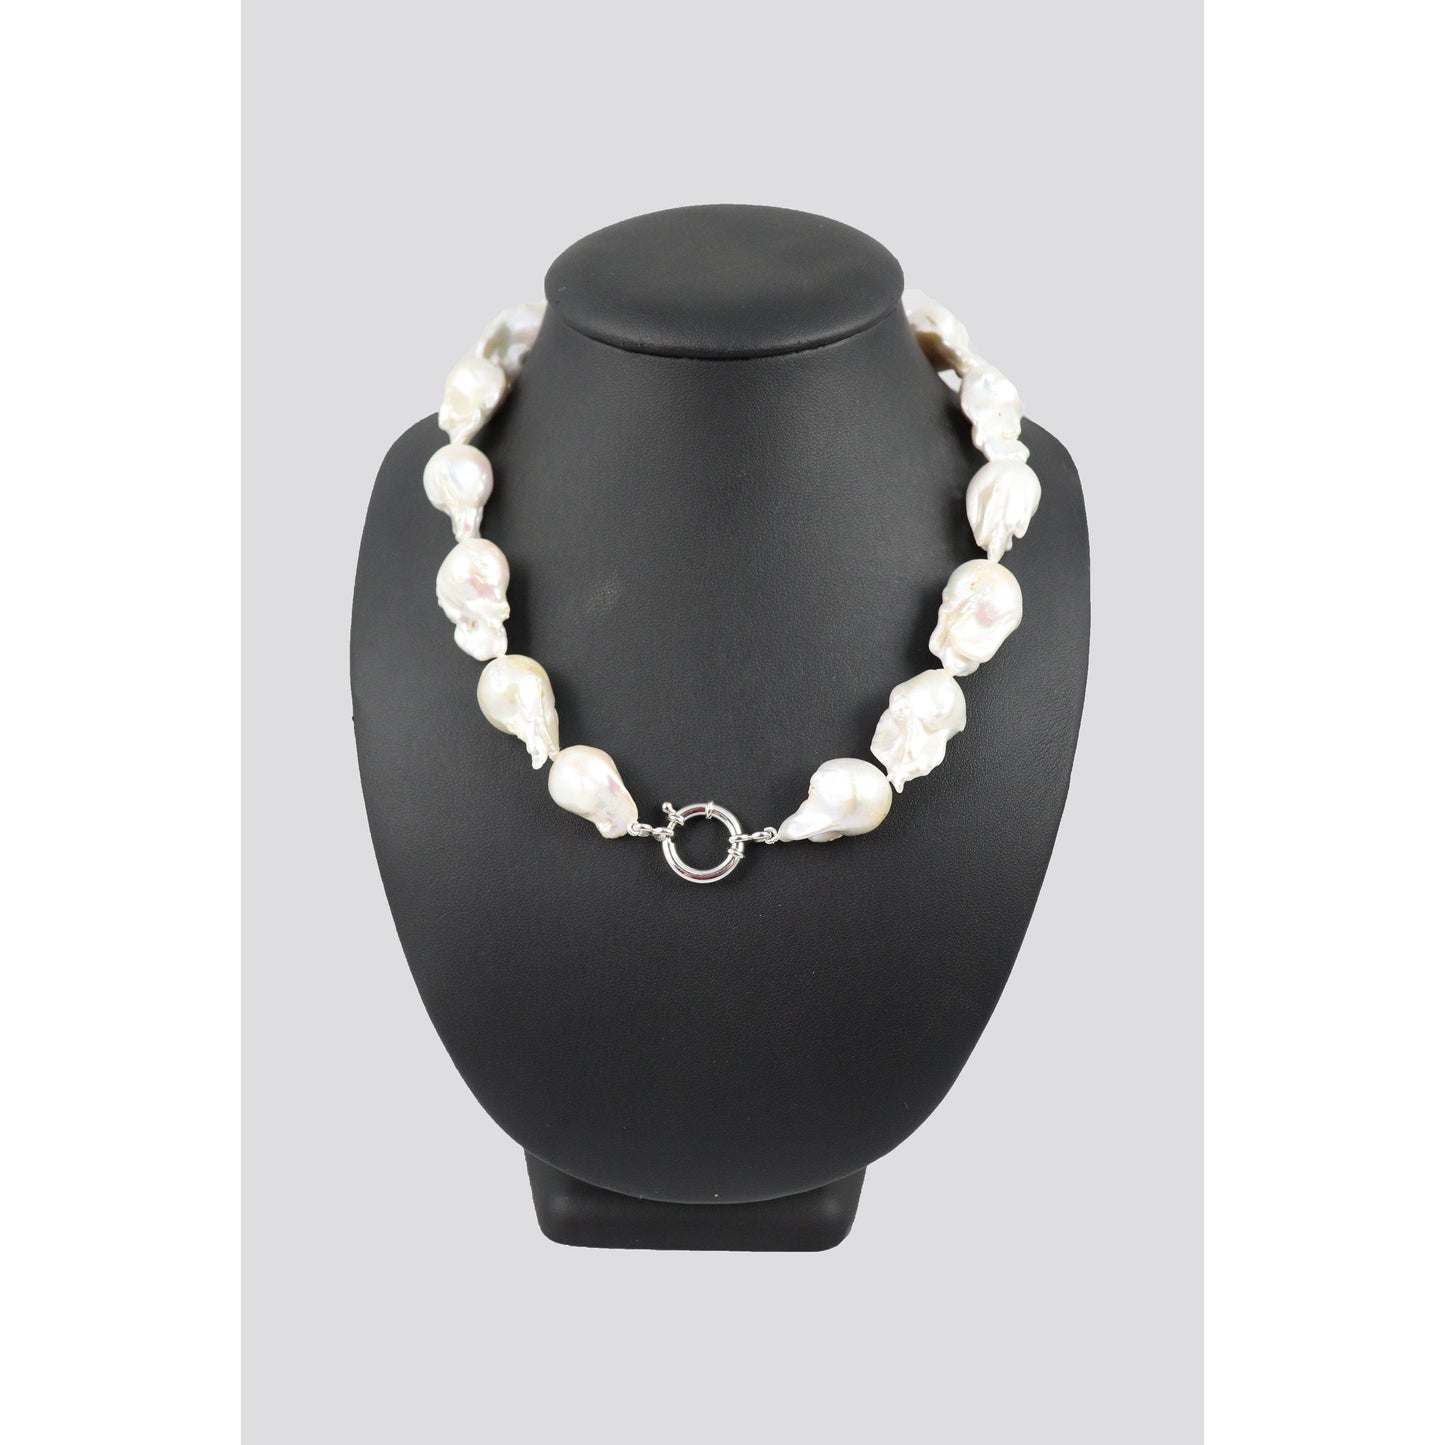 Pearl necklace on black mannequin.